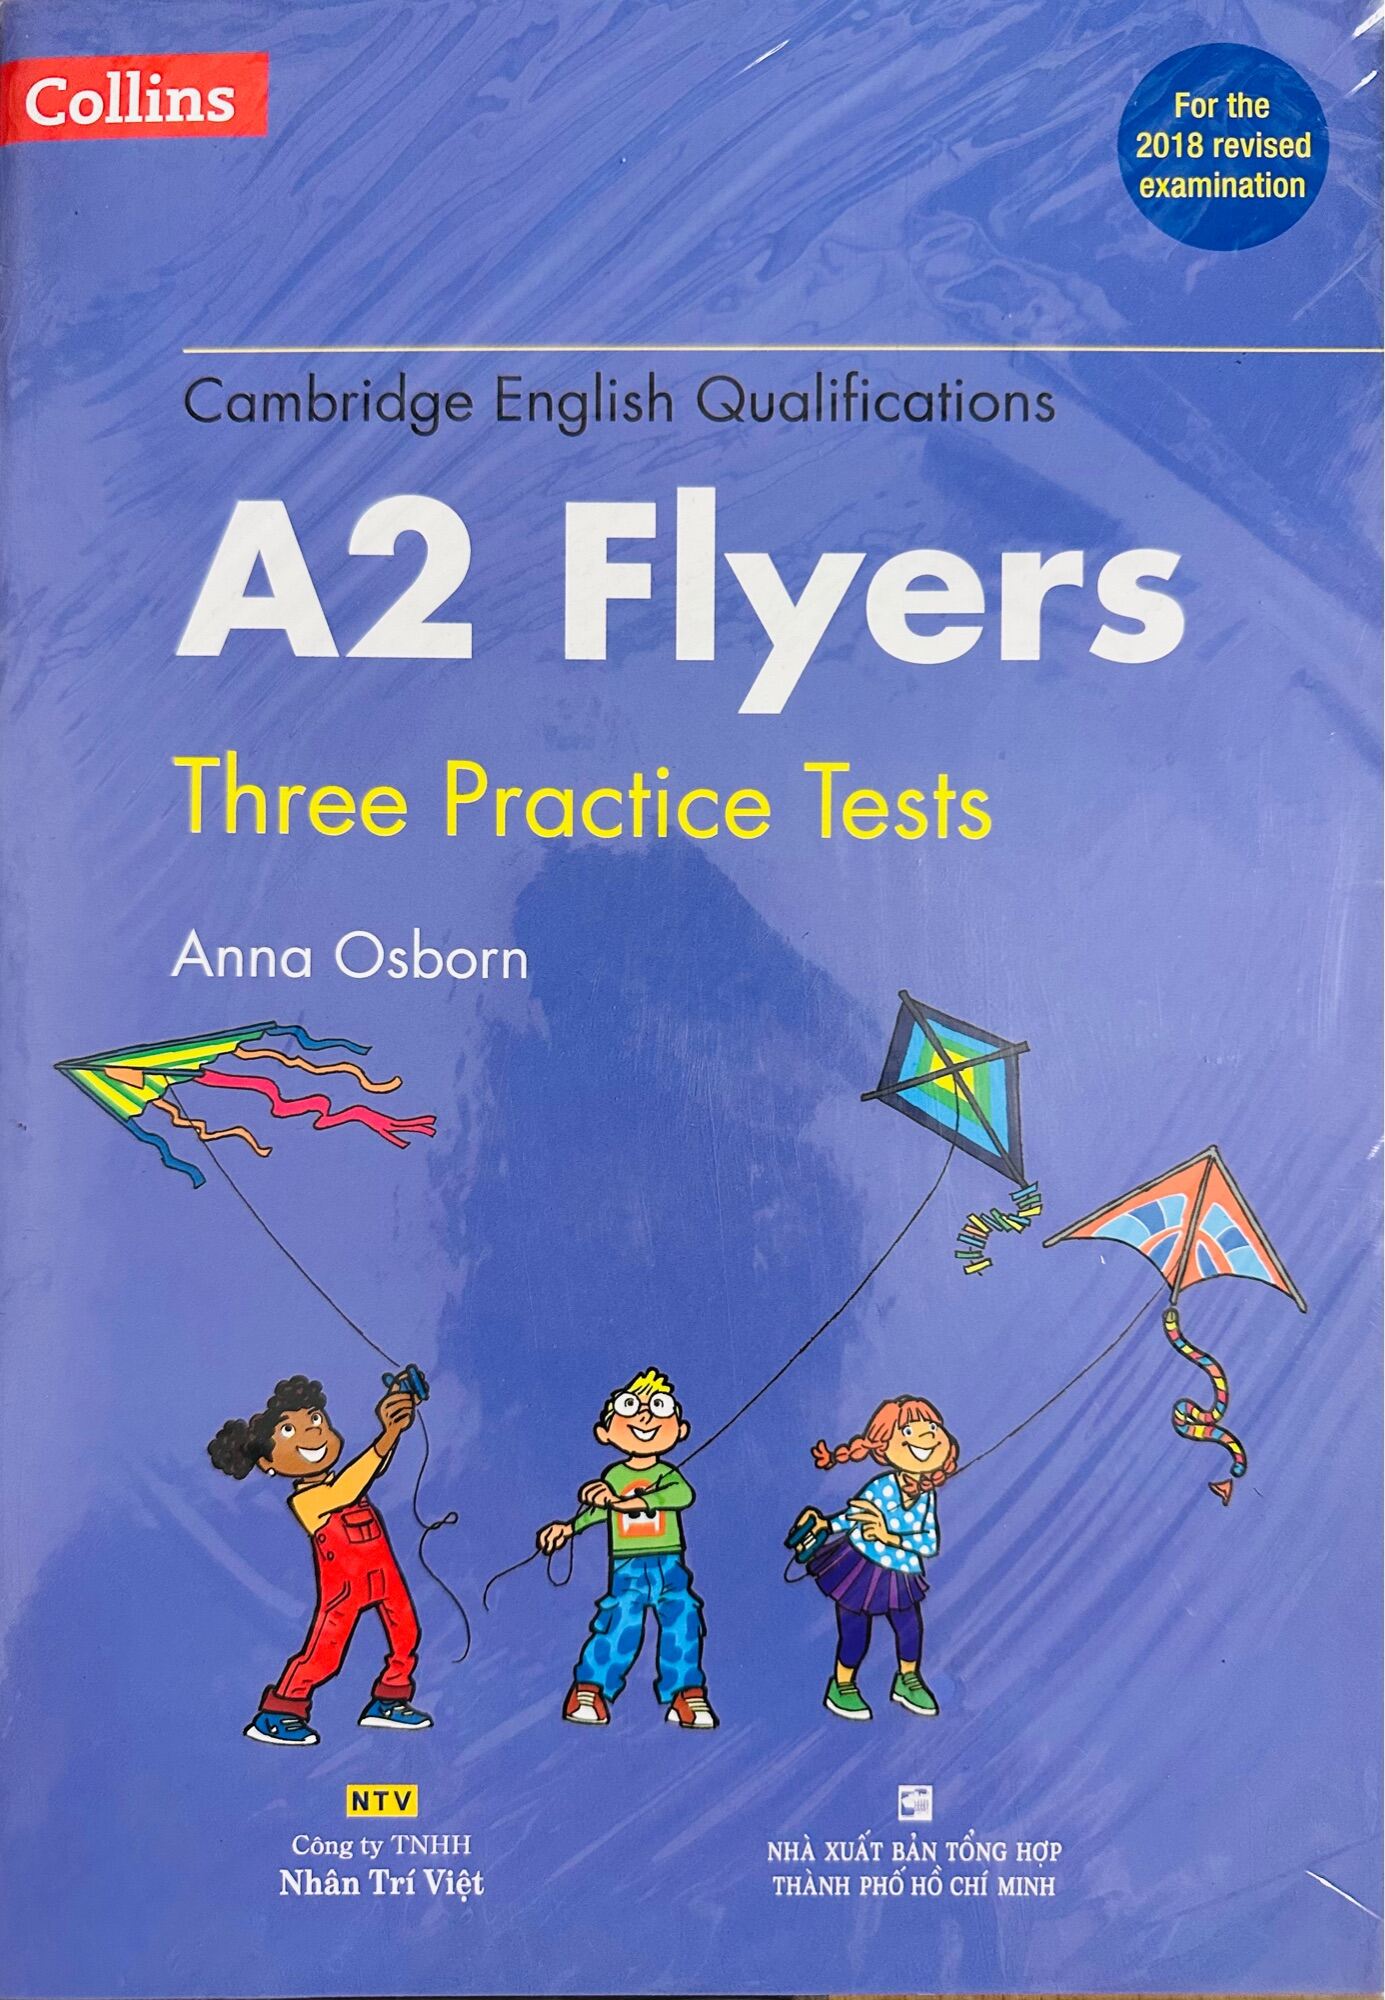 A2 Flyers - Three Practice Tests